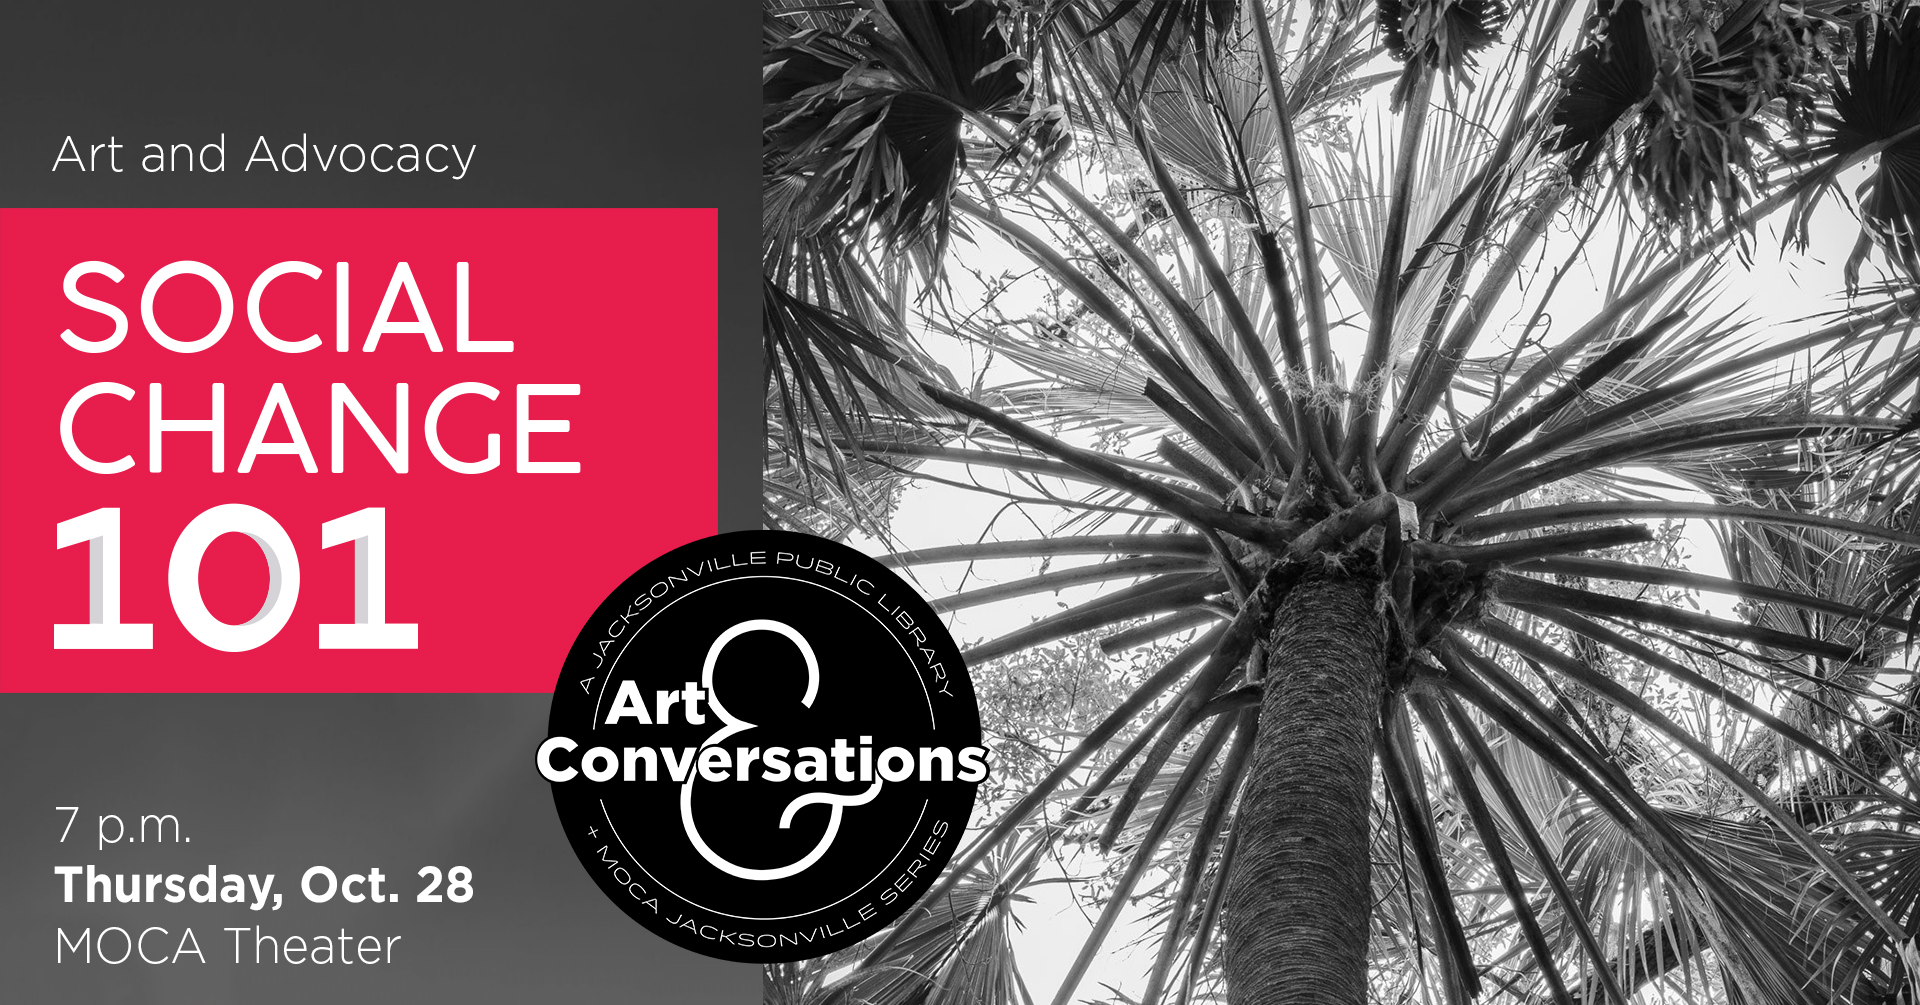 Art & Conversations: Social Change 101 - Art and Advocacy, October 28, 7:00 pm – 8:30 pm at the MOCA Theater.